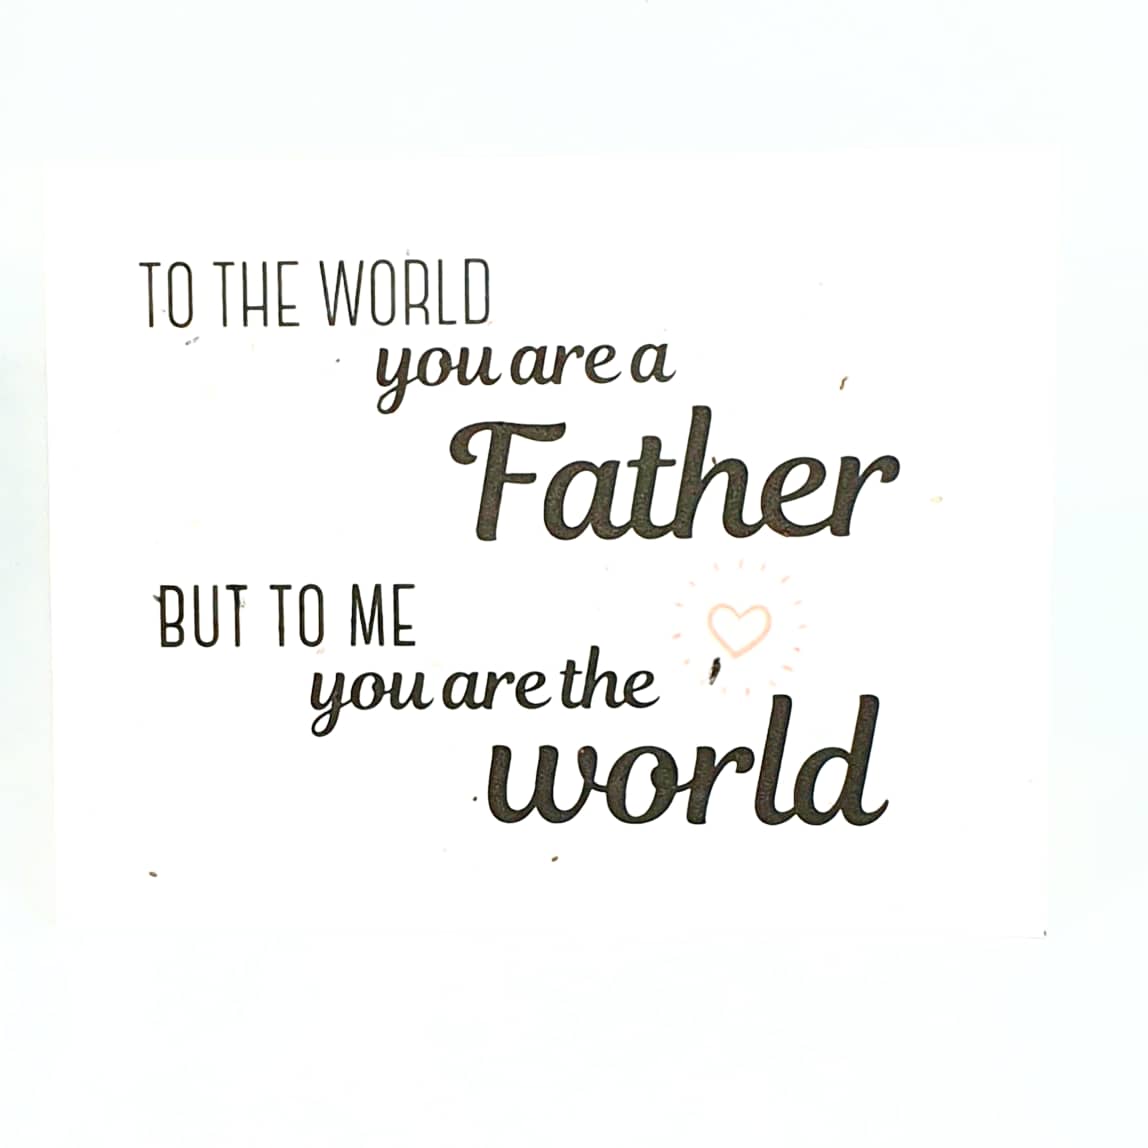 To The World You Are a Father, But To Me You Are The World